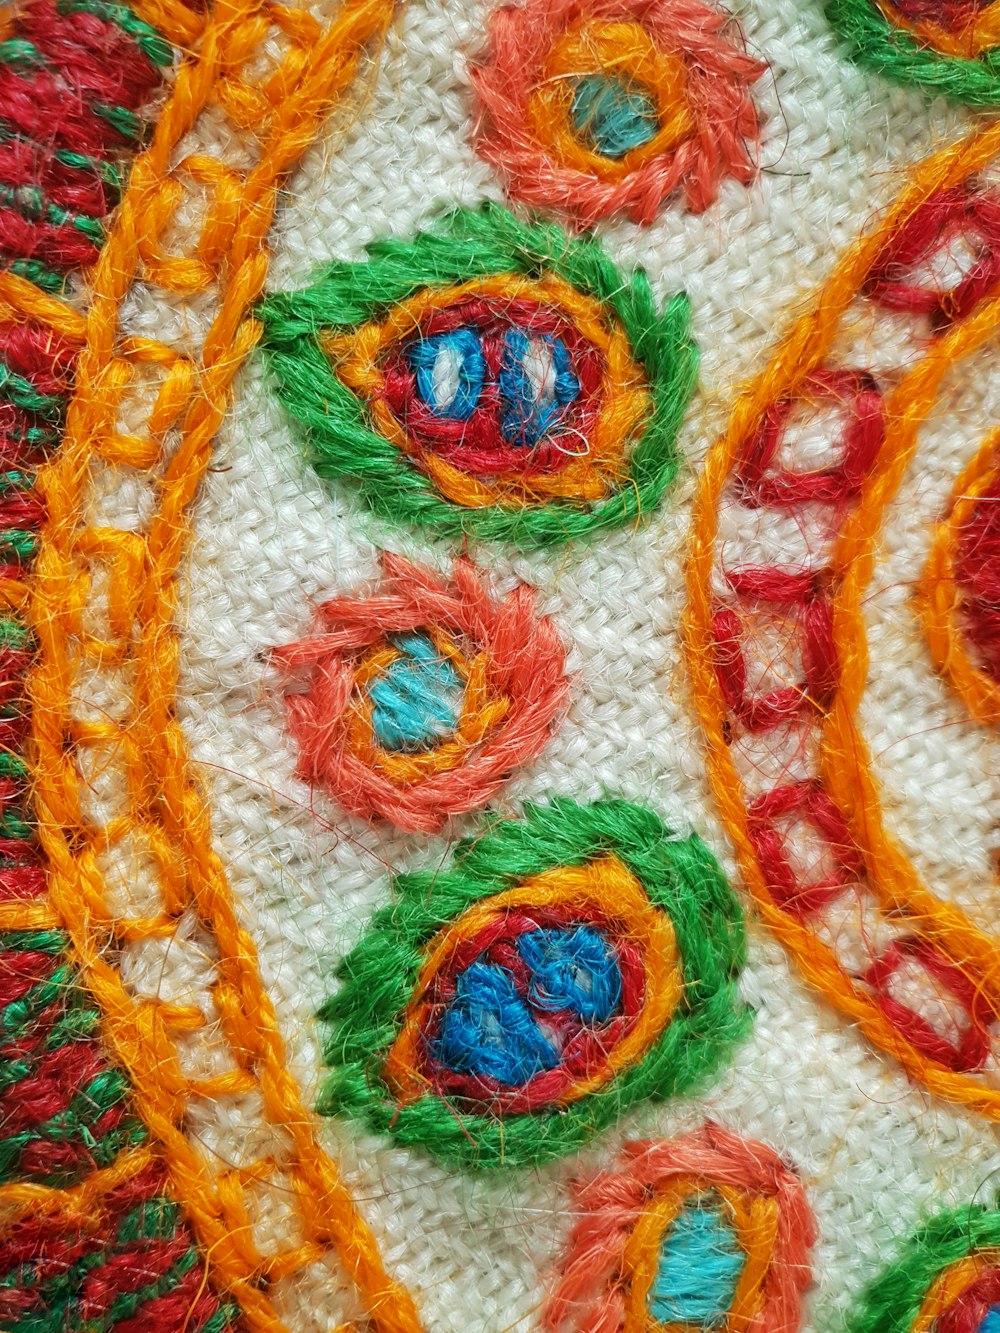 a close up of a piece of art made of yarn